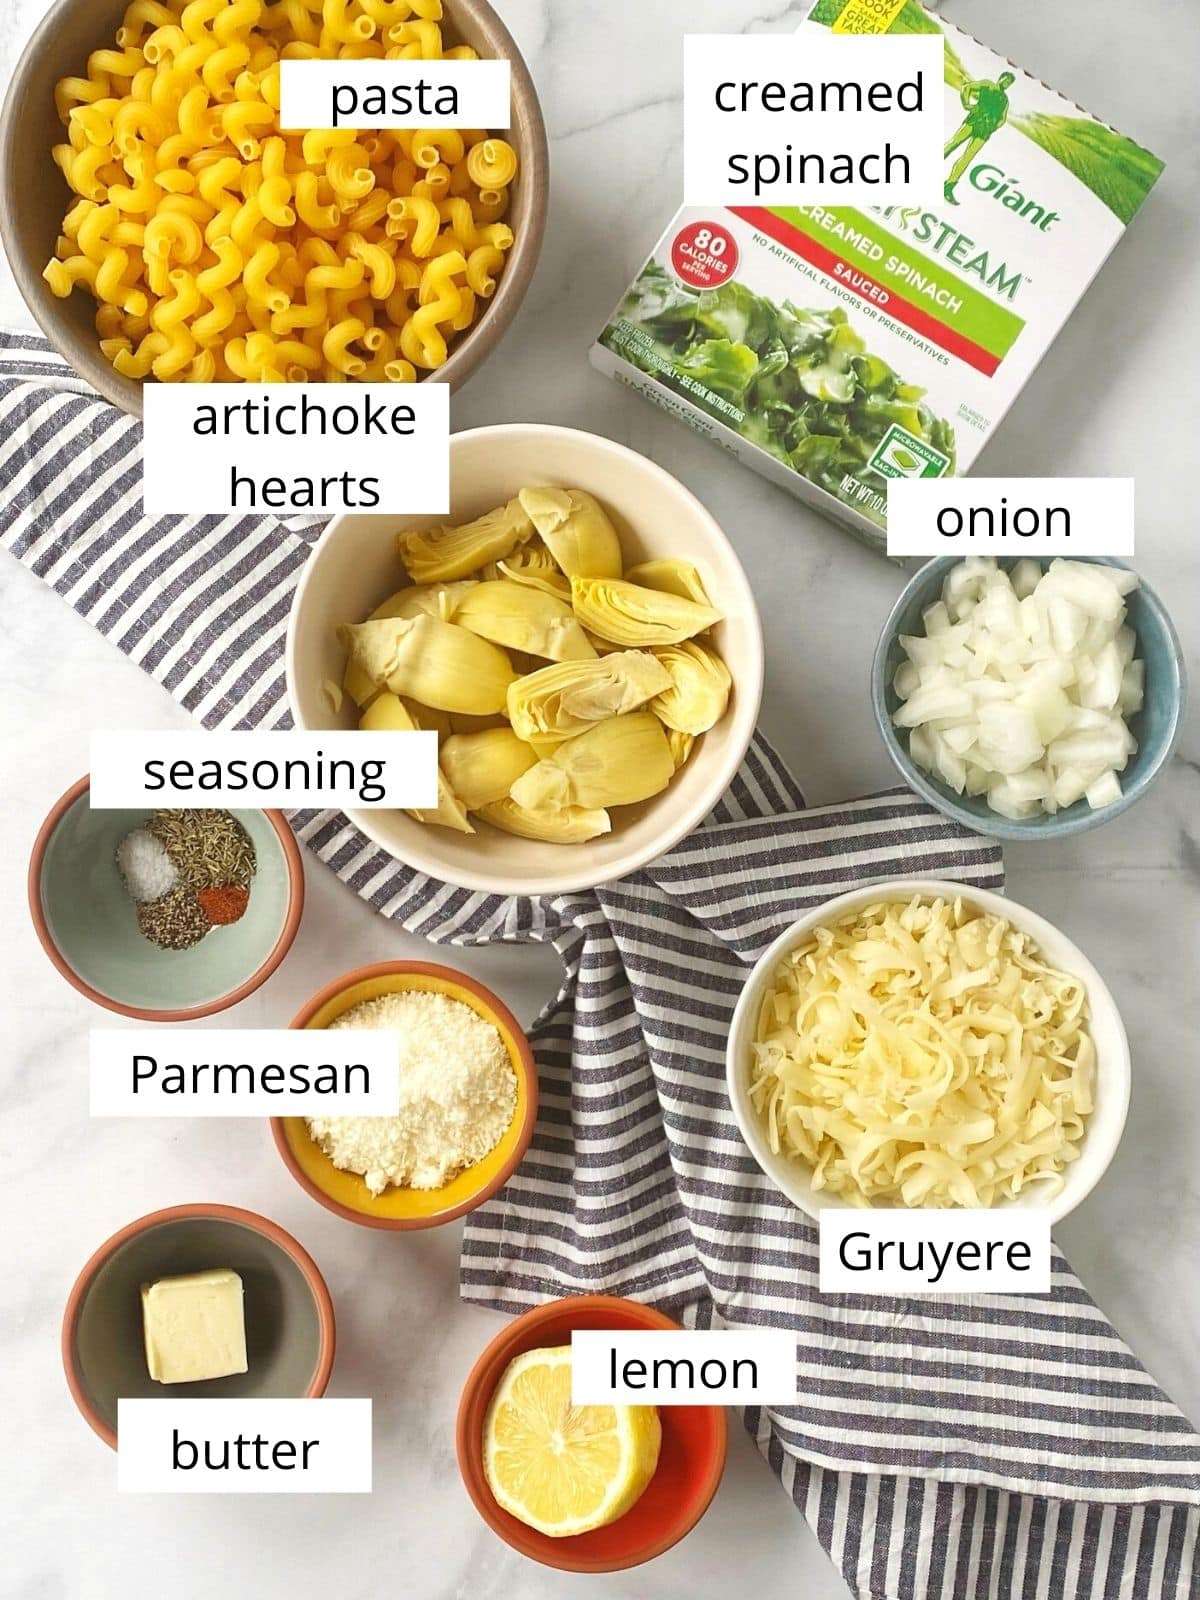 ingredients for spinach artichoke pasta.